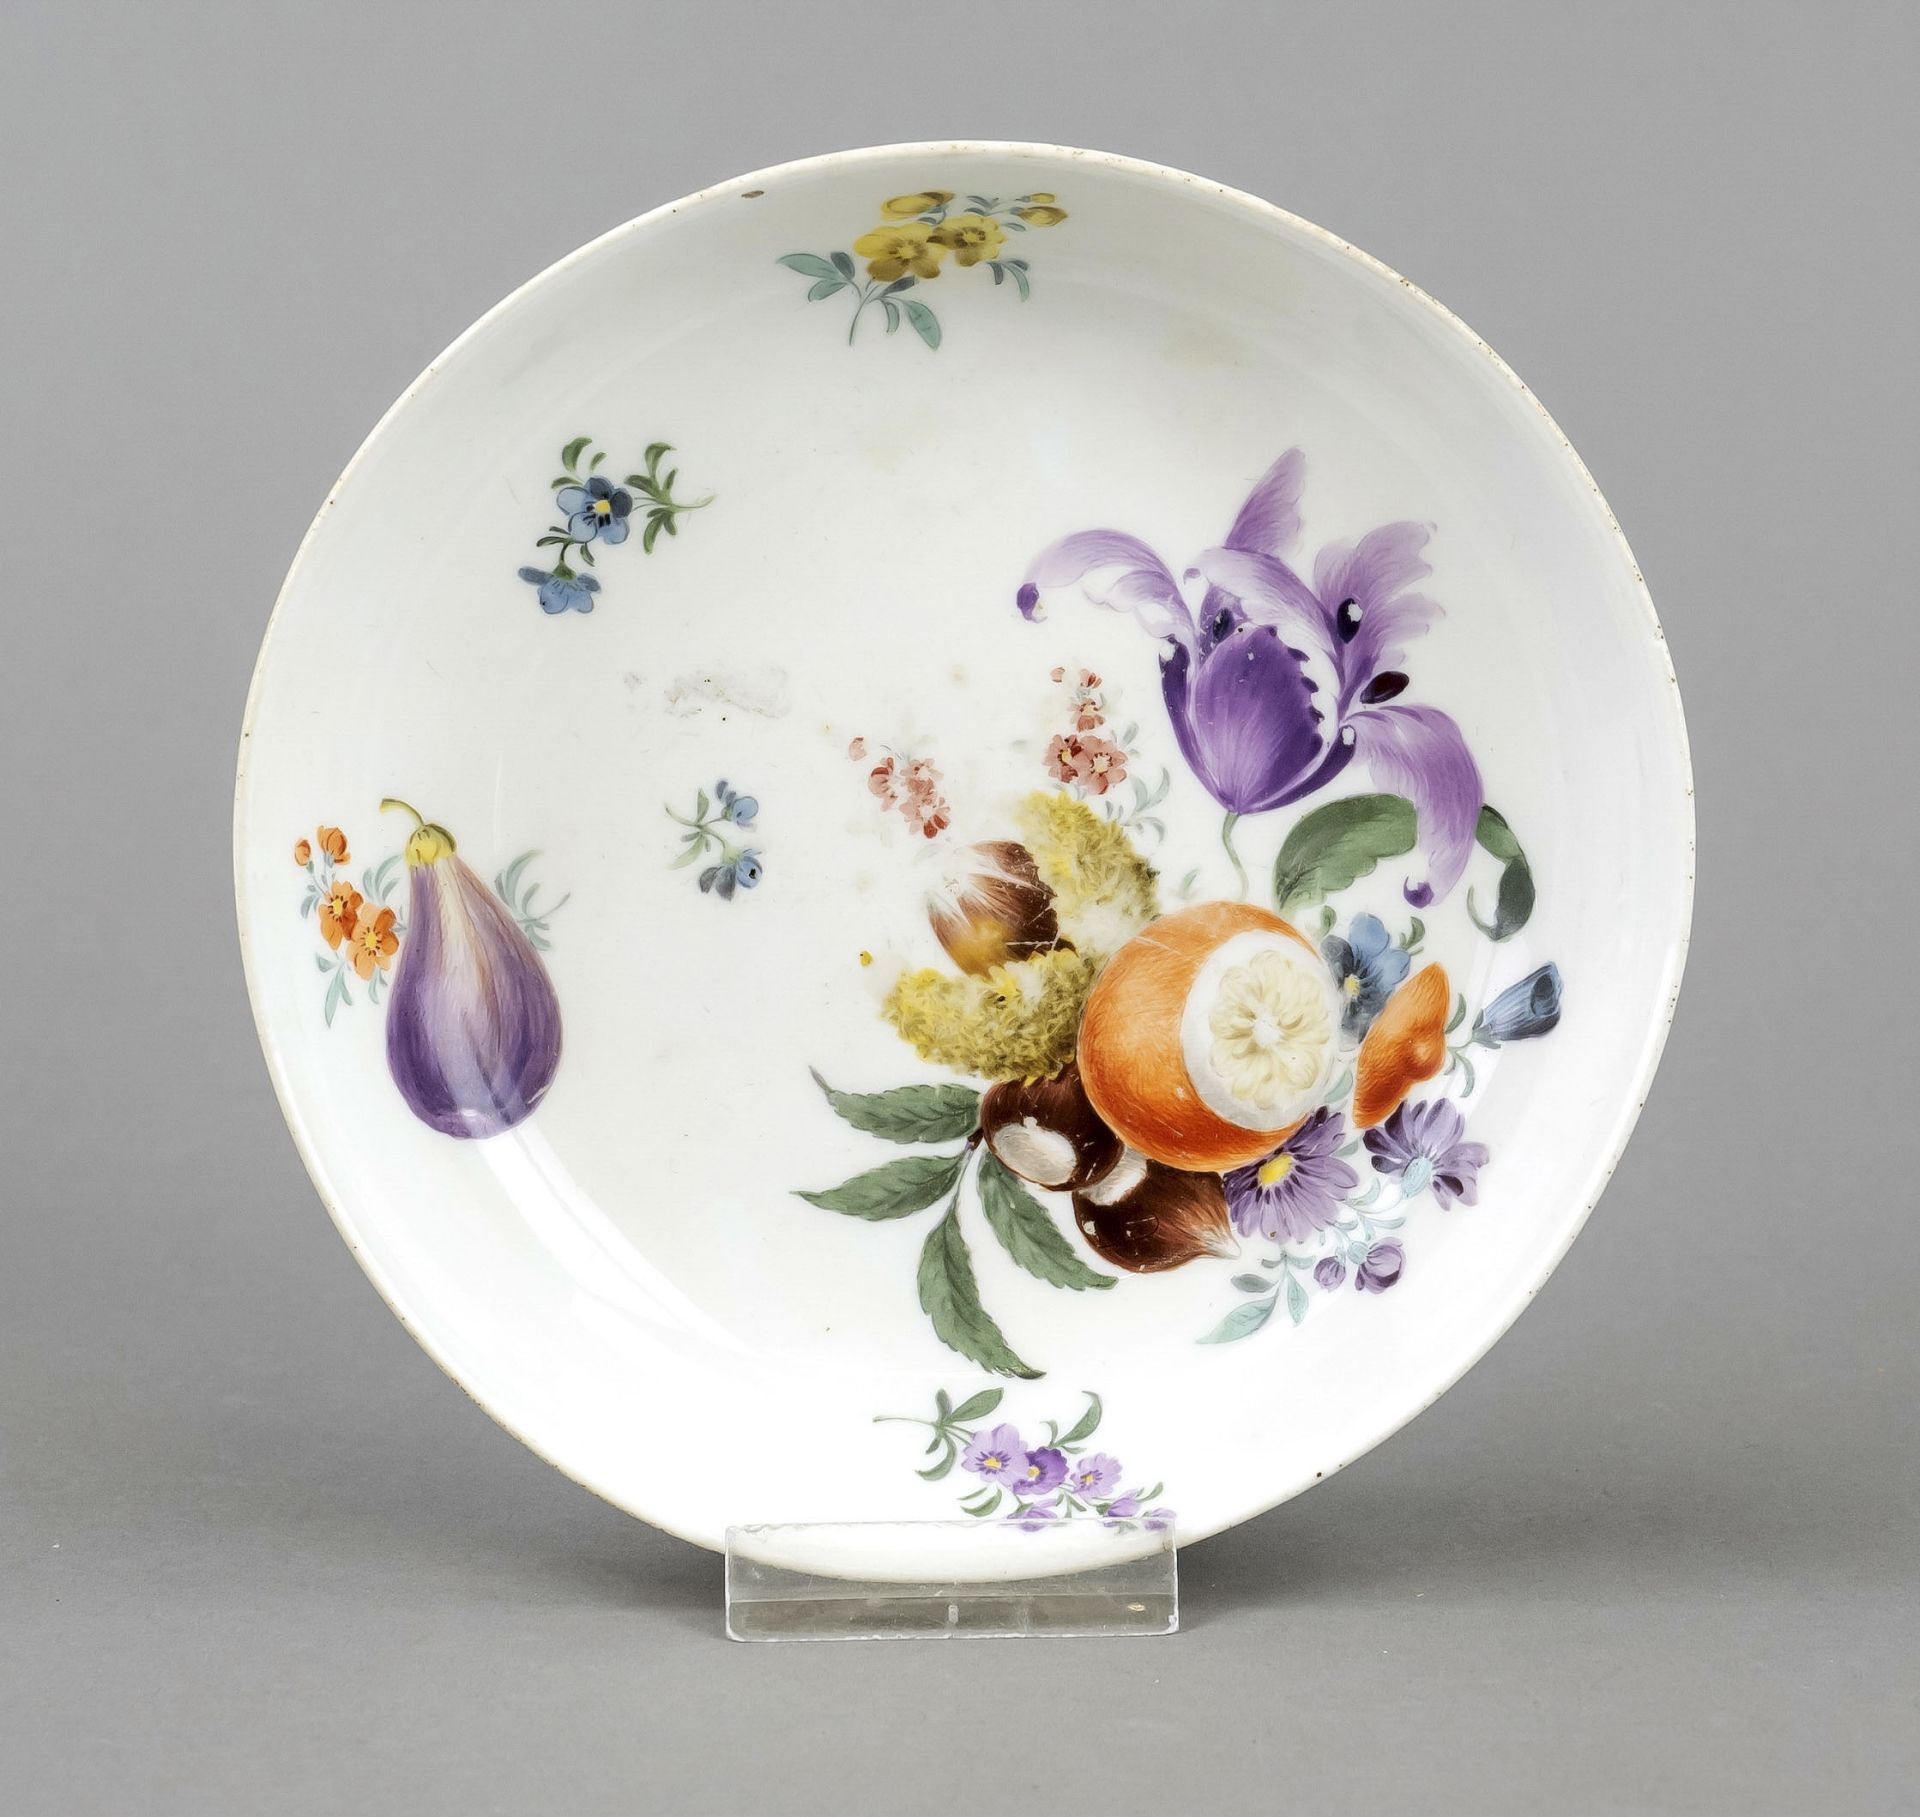 Bowl, Meissen, 1st half 19th century, polychrome painted with bouquet of flowers, chestnuts, oranges